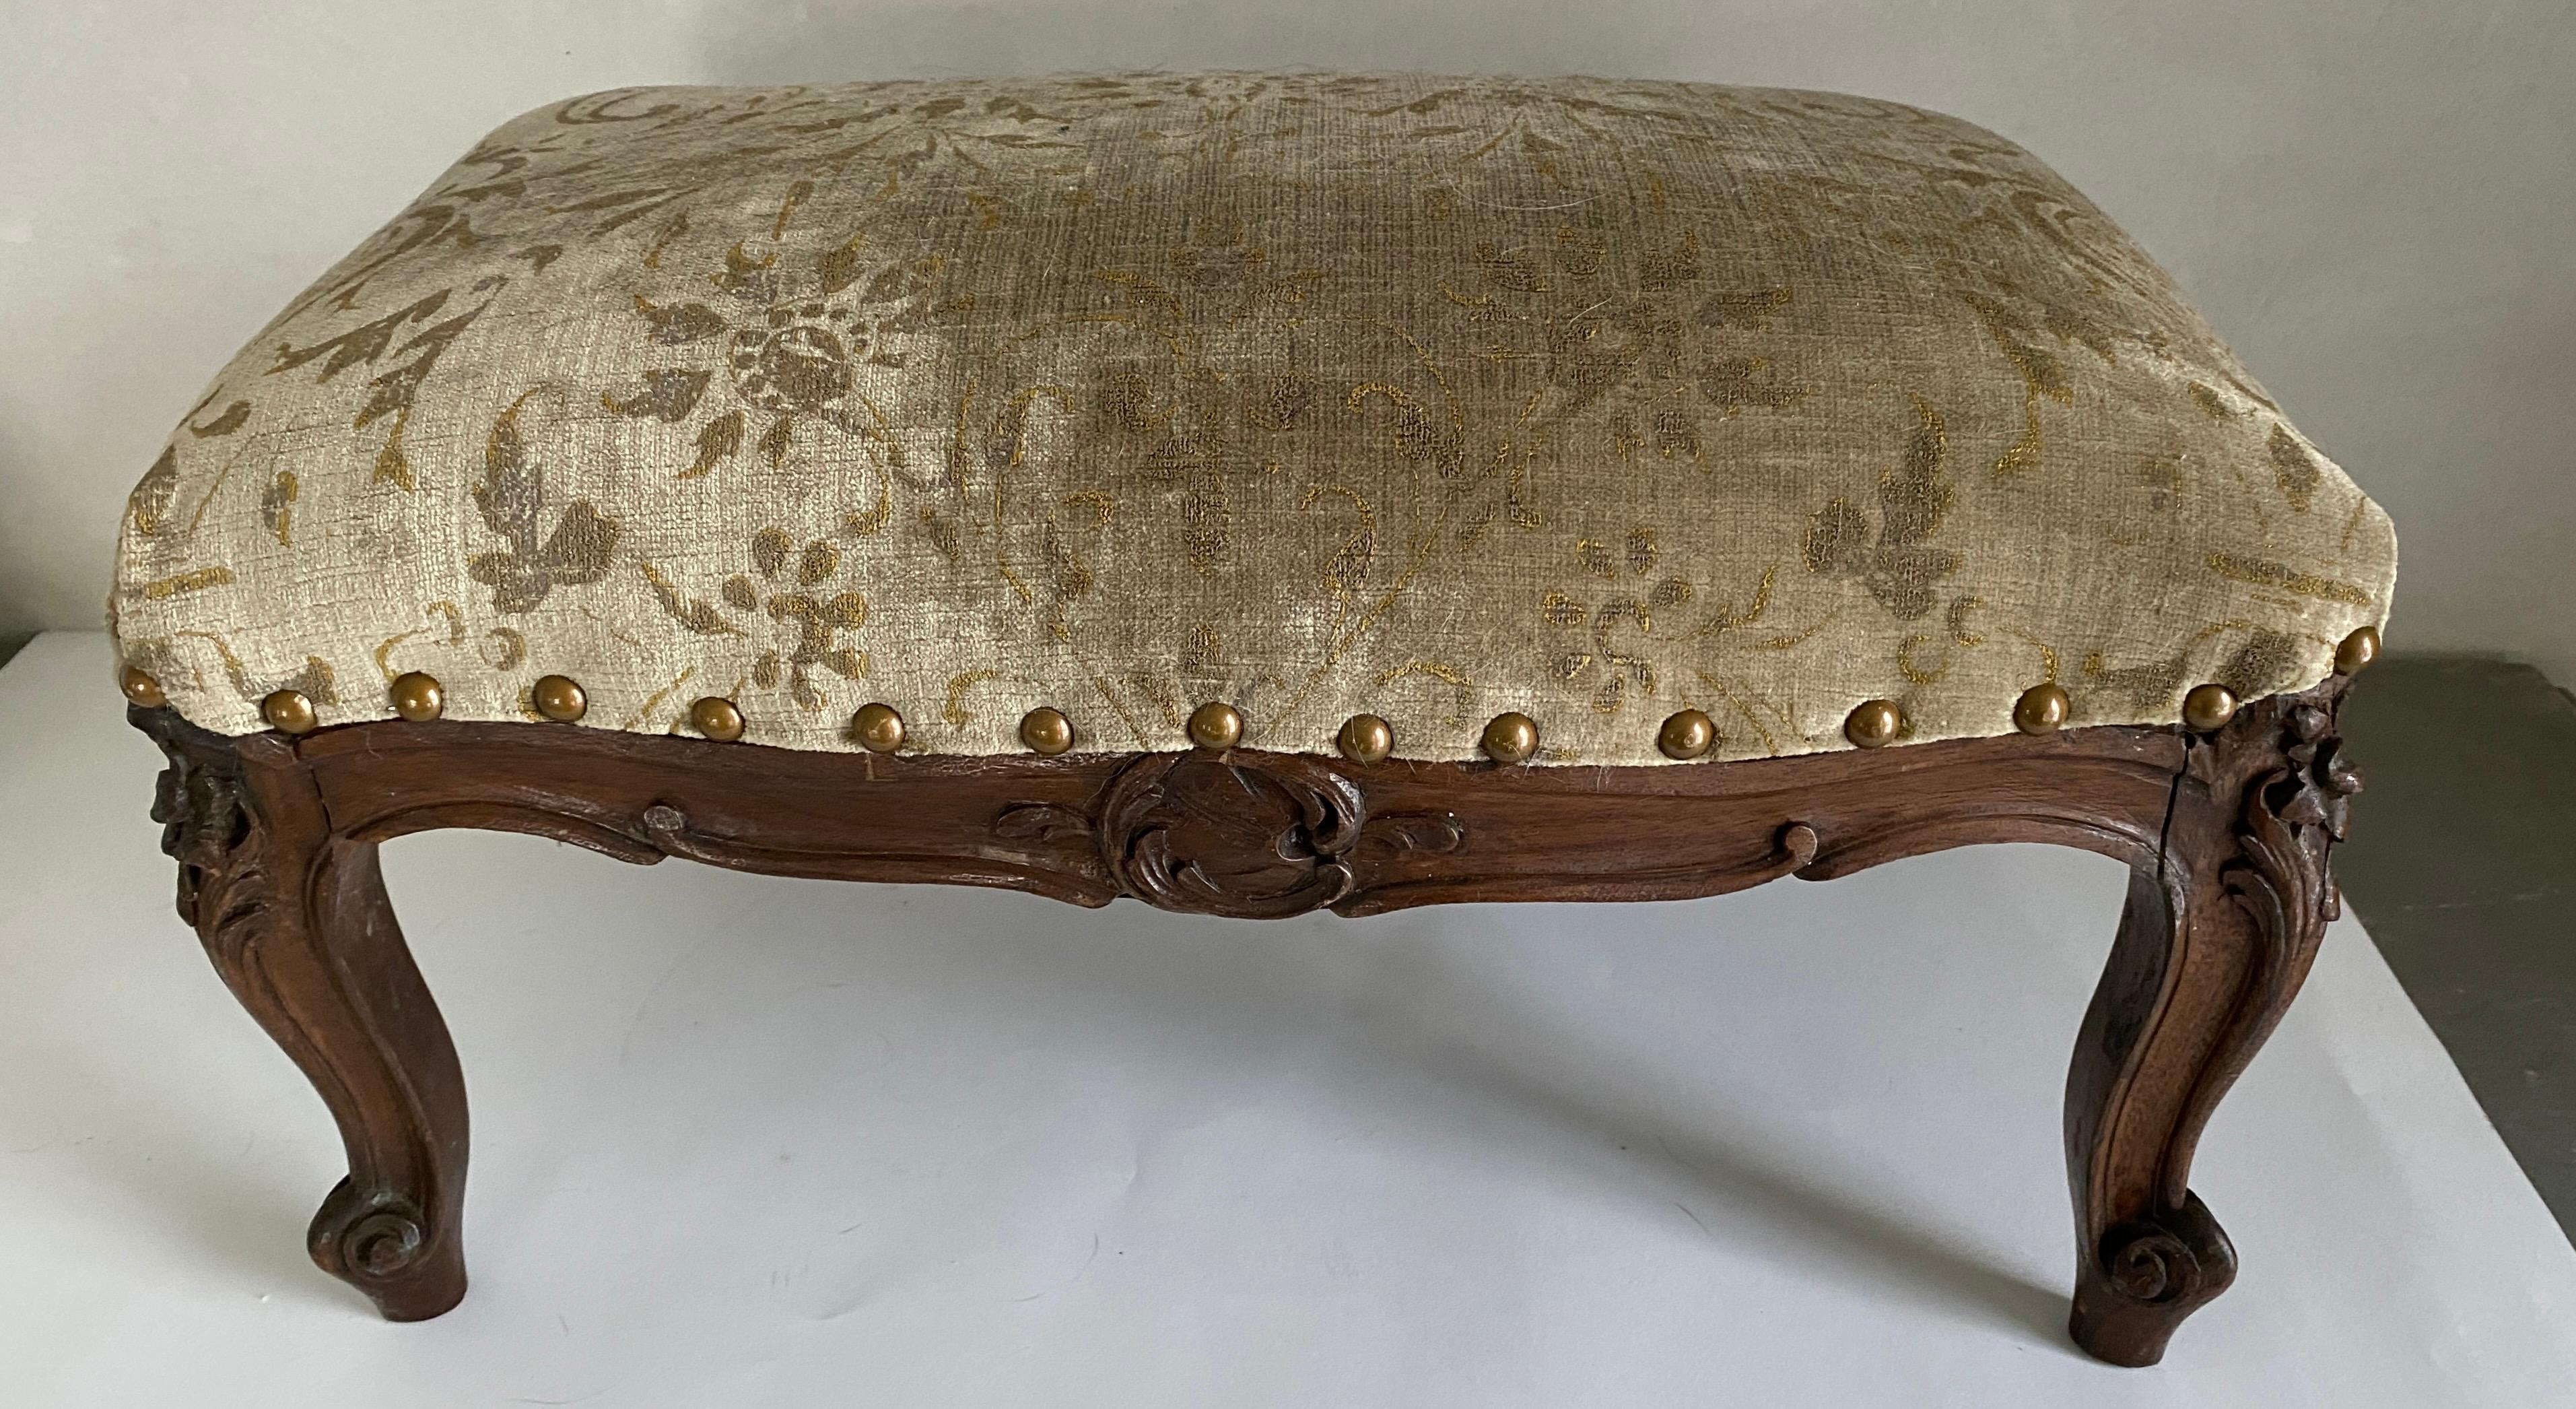 An unusual size, petite and low, this small Louis XV footstool or tabouret, only 10